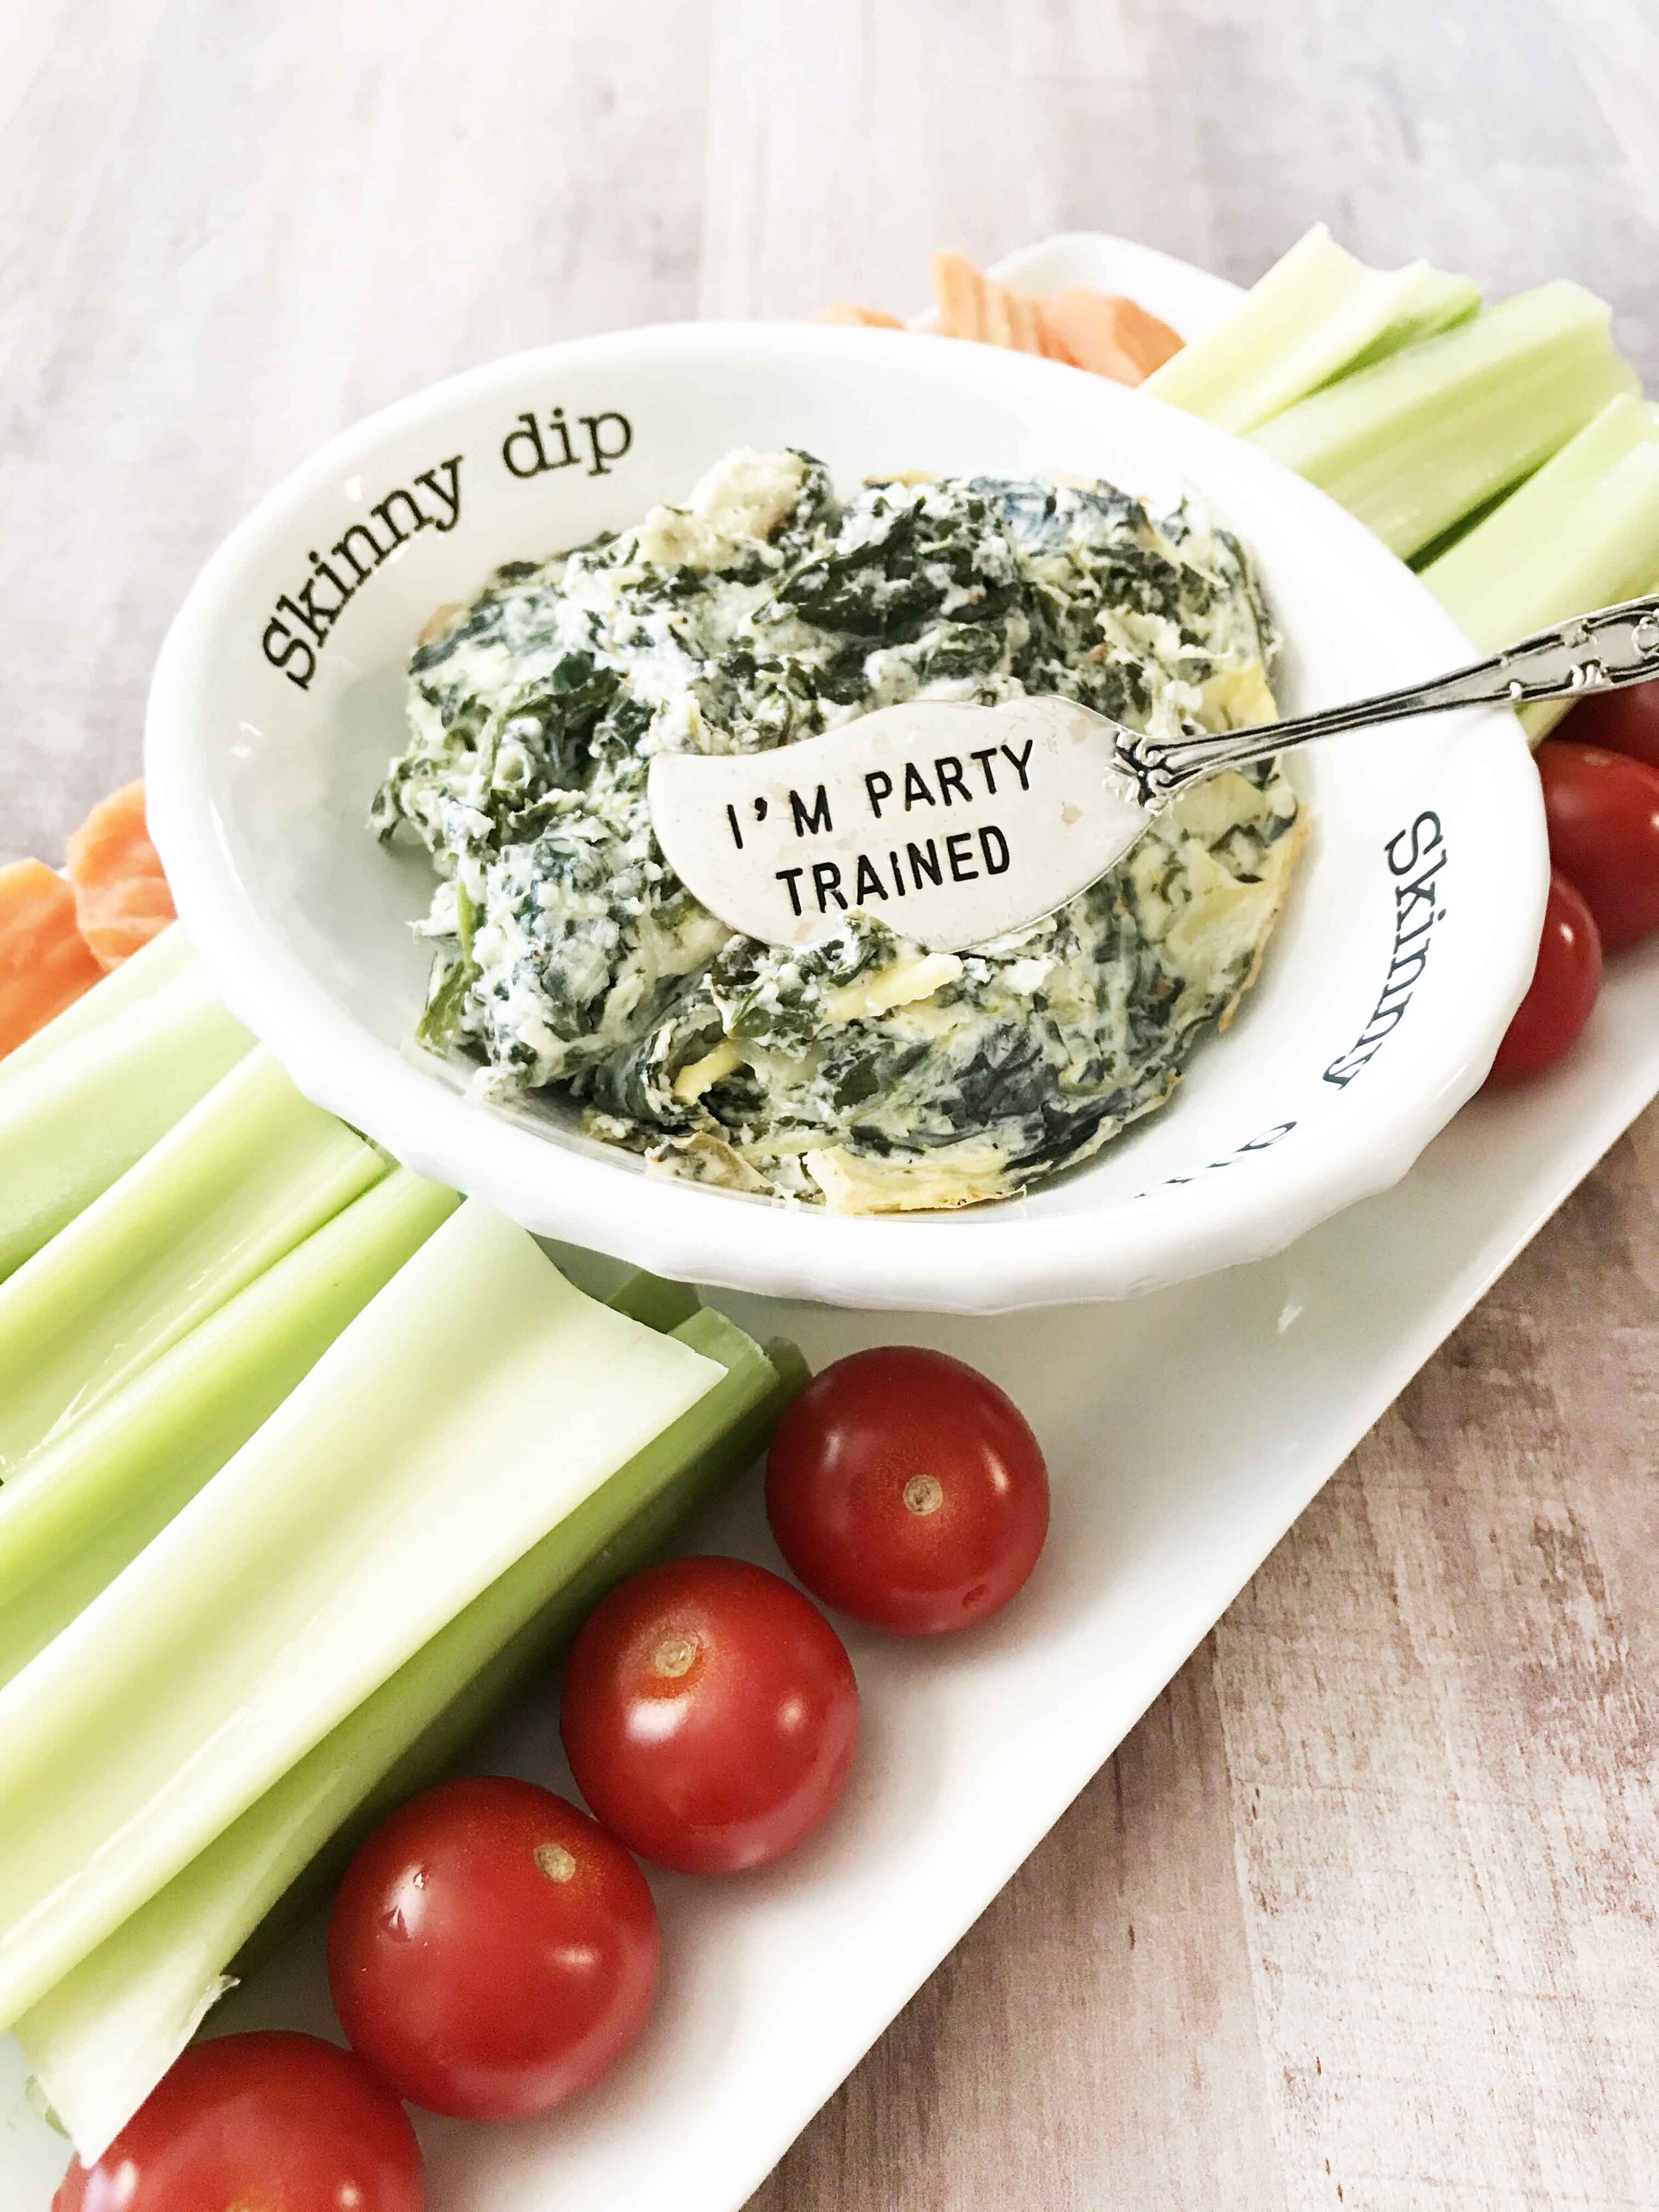 CrockPot Spinach Artichoke Dip - Spend With Pennies